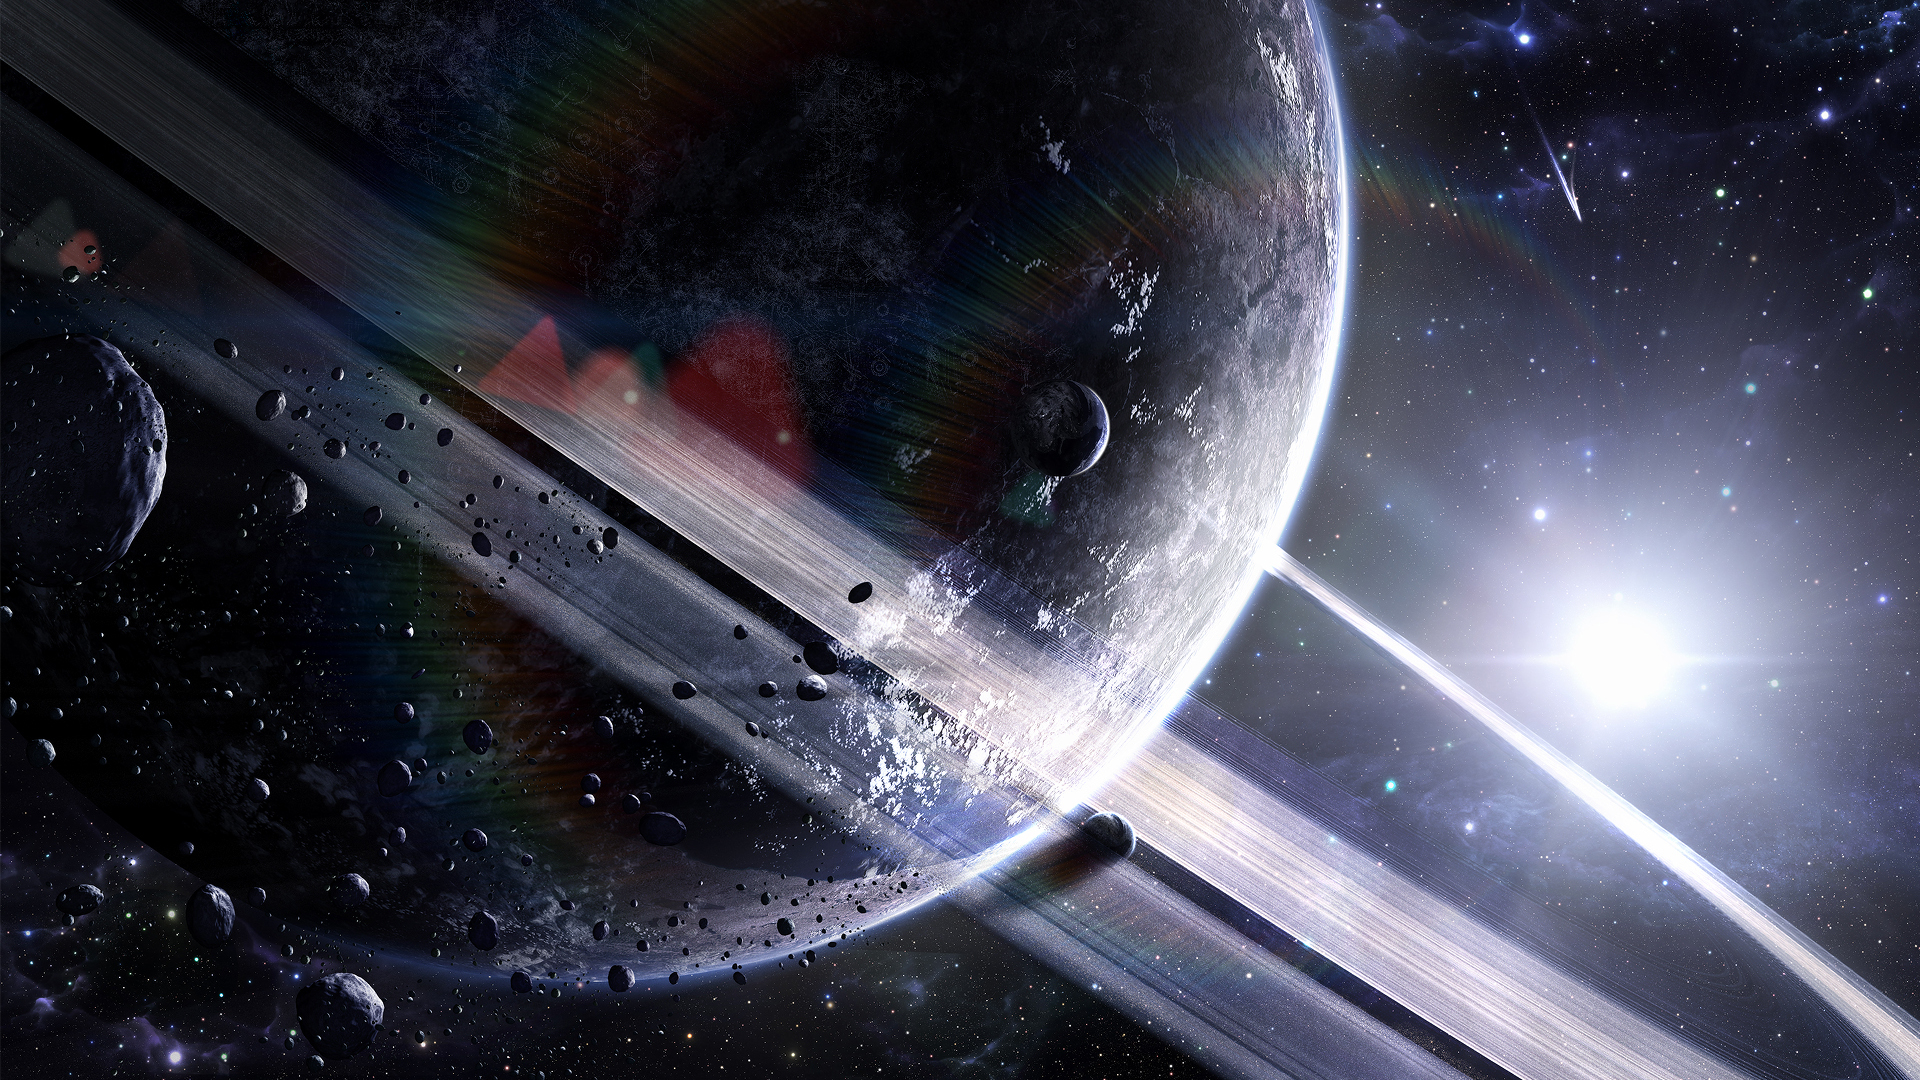 X HD Wallpaper Space Submited Image